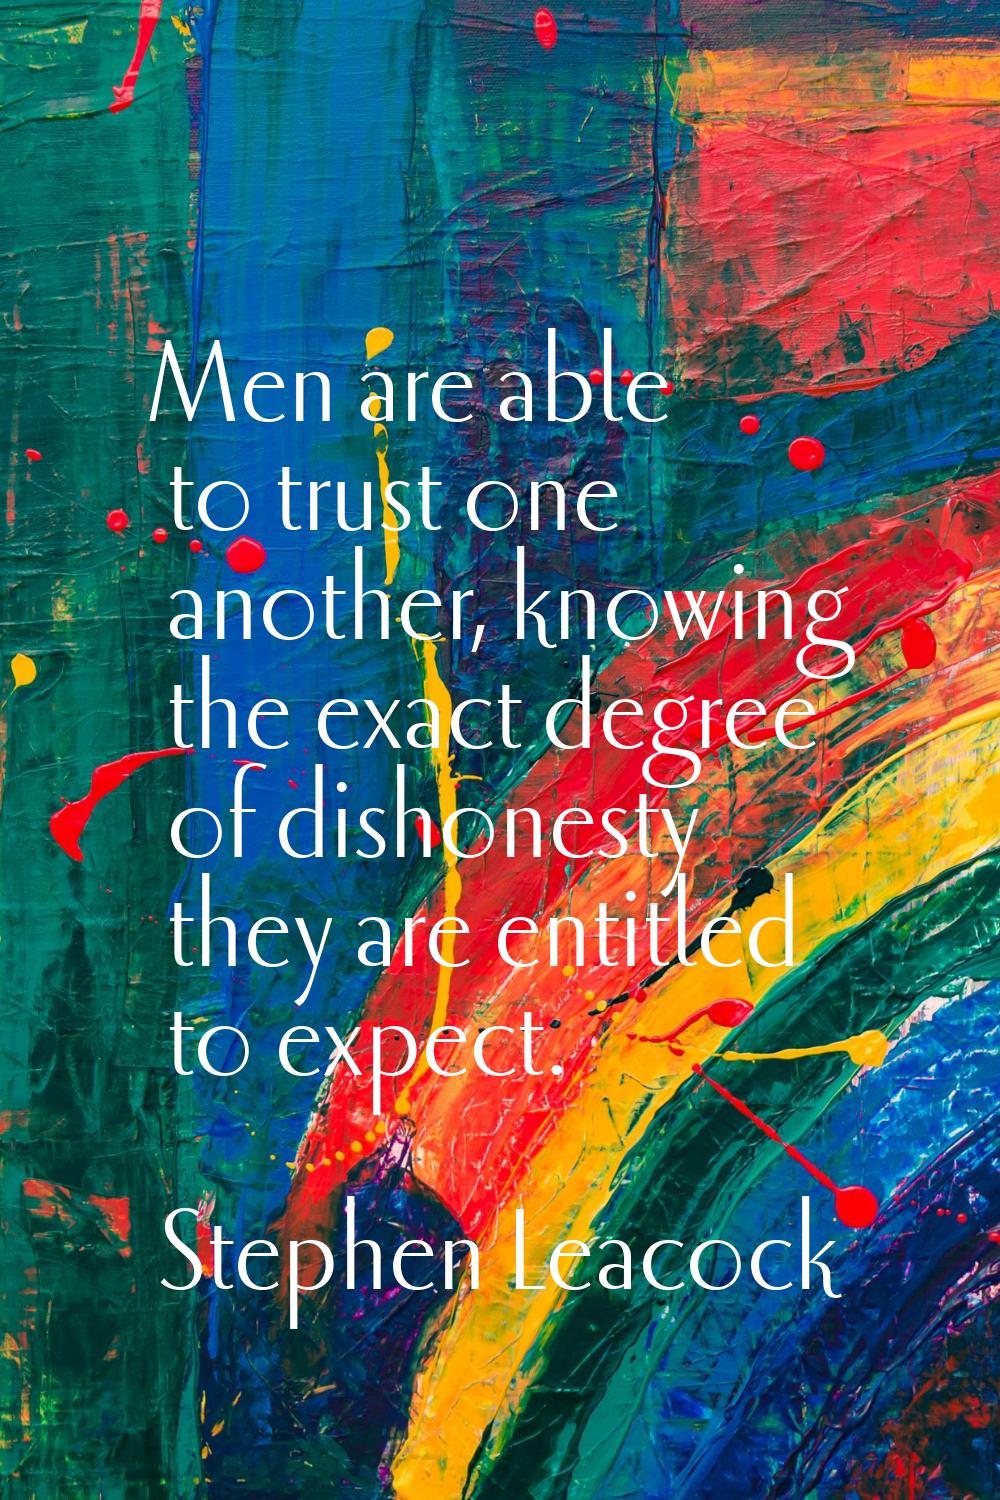 Men are able to trust one another, knowing the exact degree of dishonesty they are entitled to expe